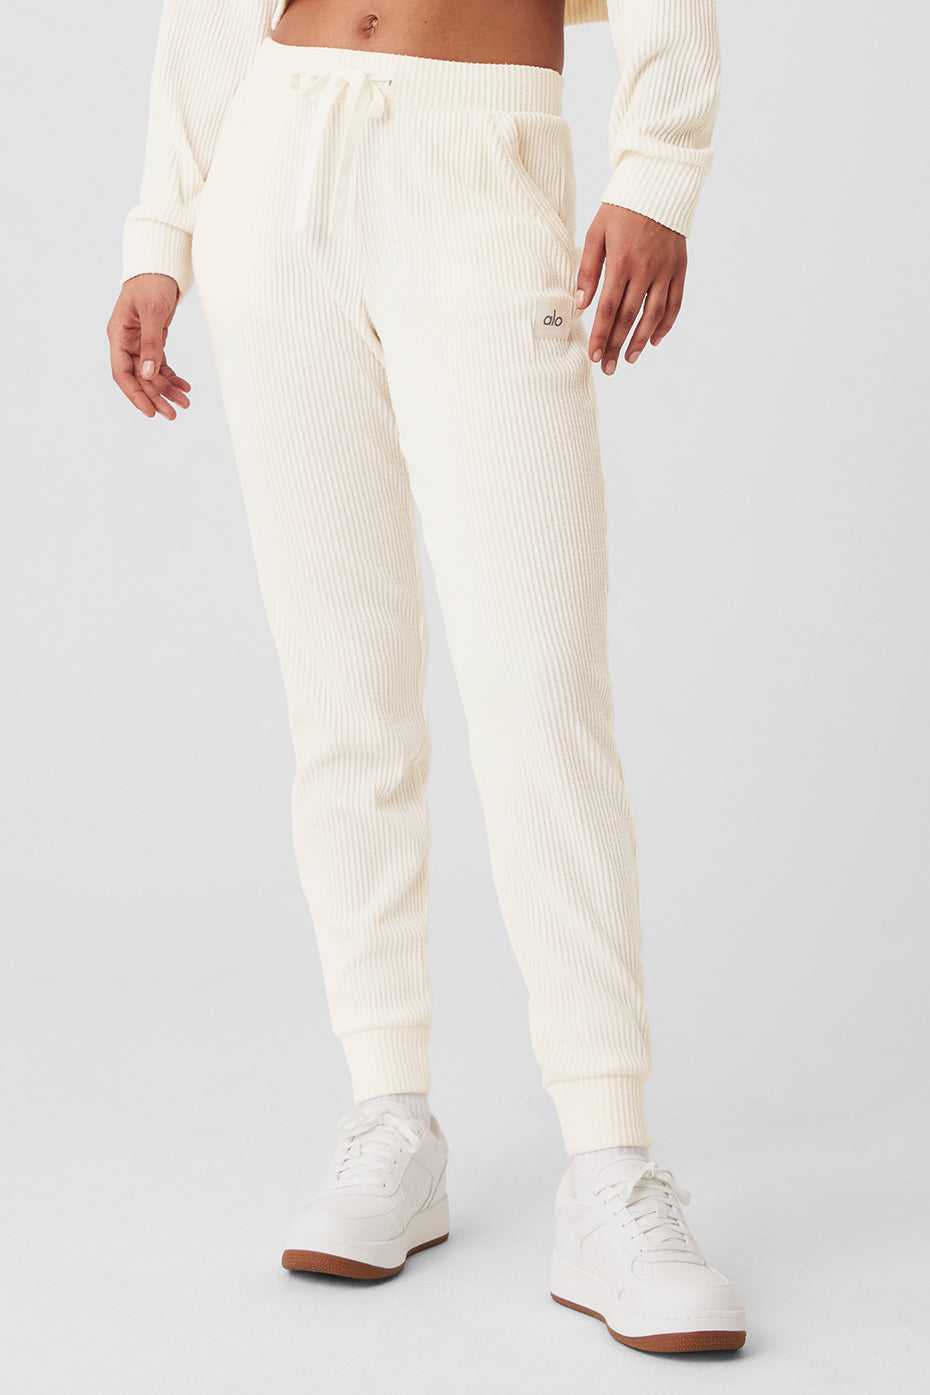 Muse Sweatpant in Ivory White, Size: Small | Alo Yoga®